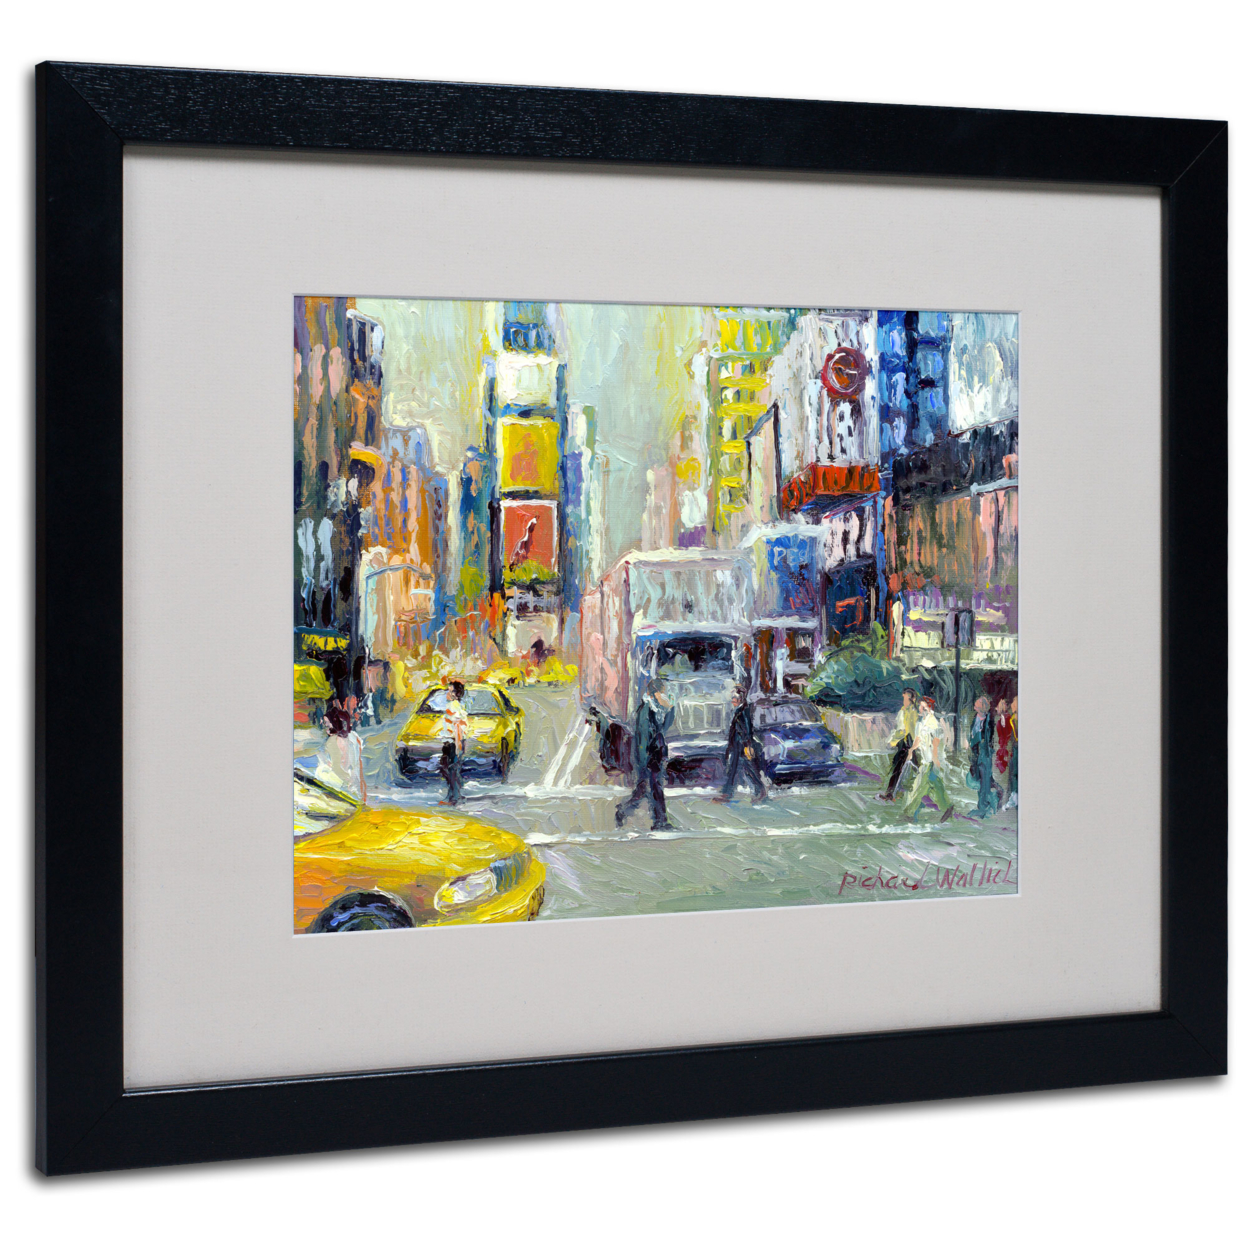 Richard Wallich 'Times Square' Black Wooden Framed Art 18 X 22 Inches